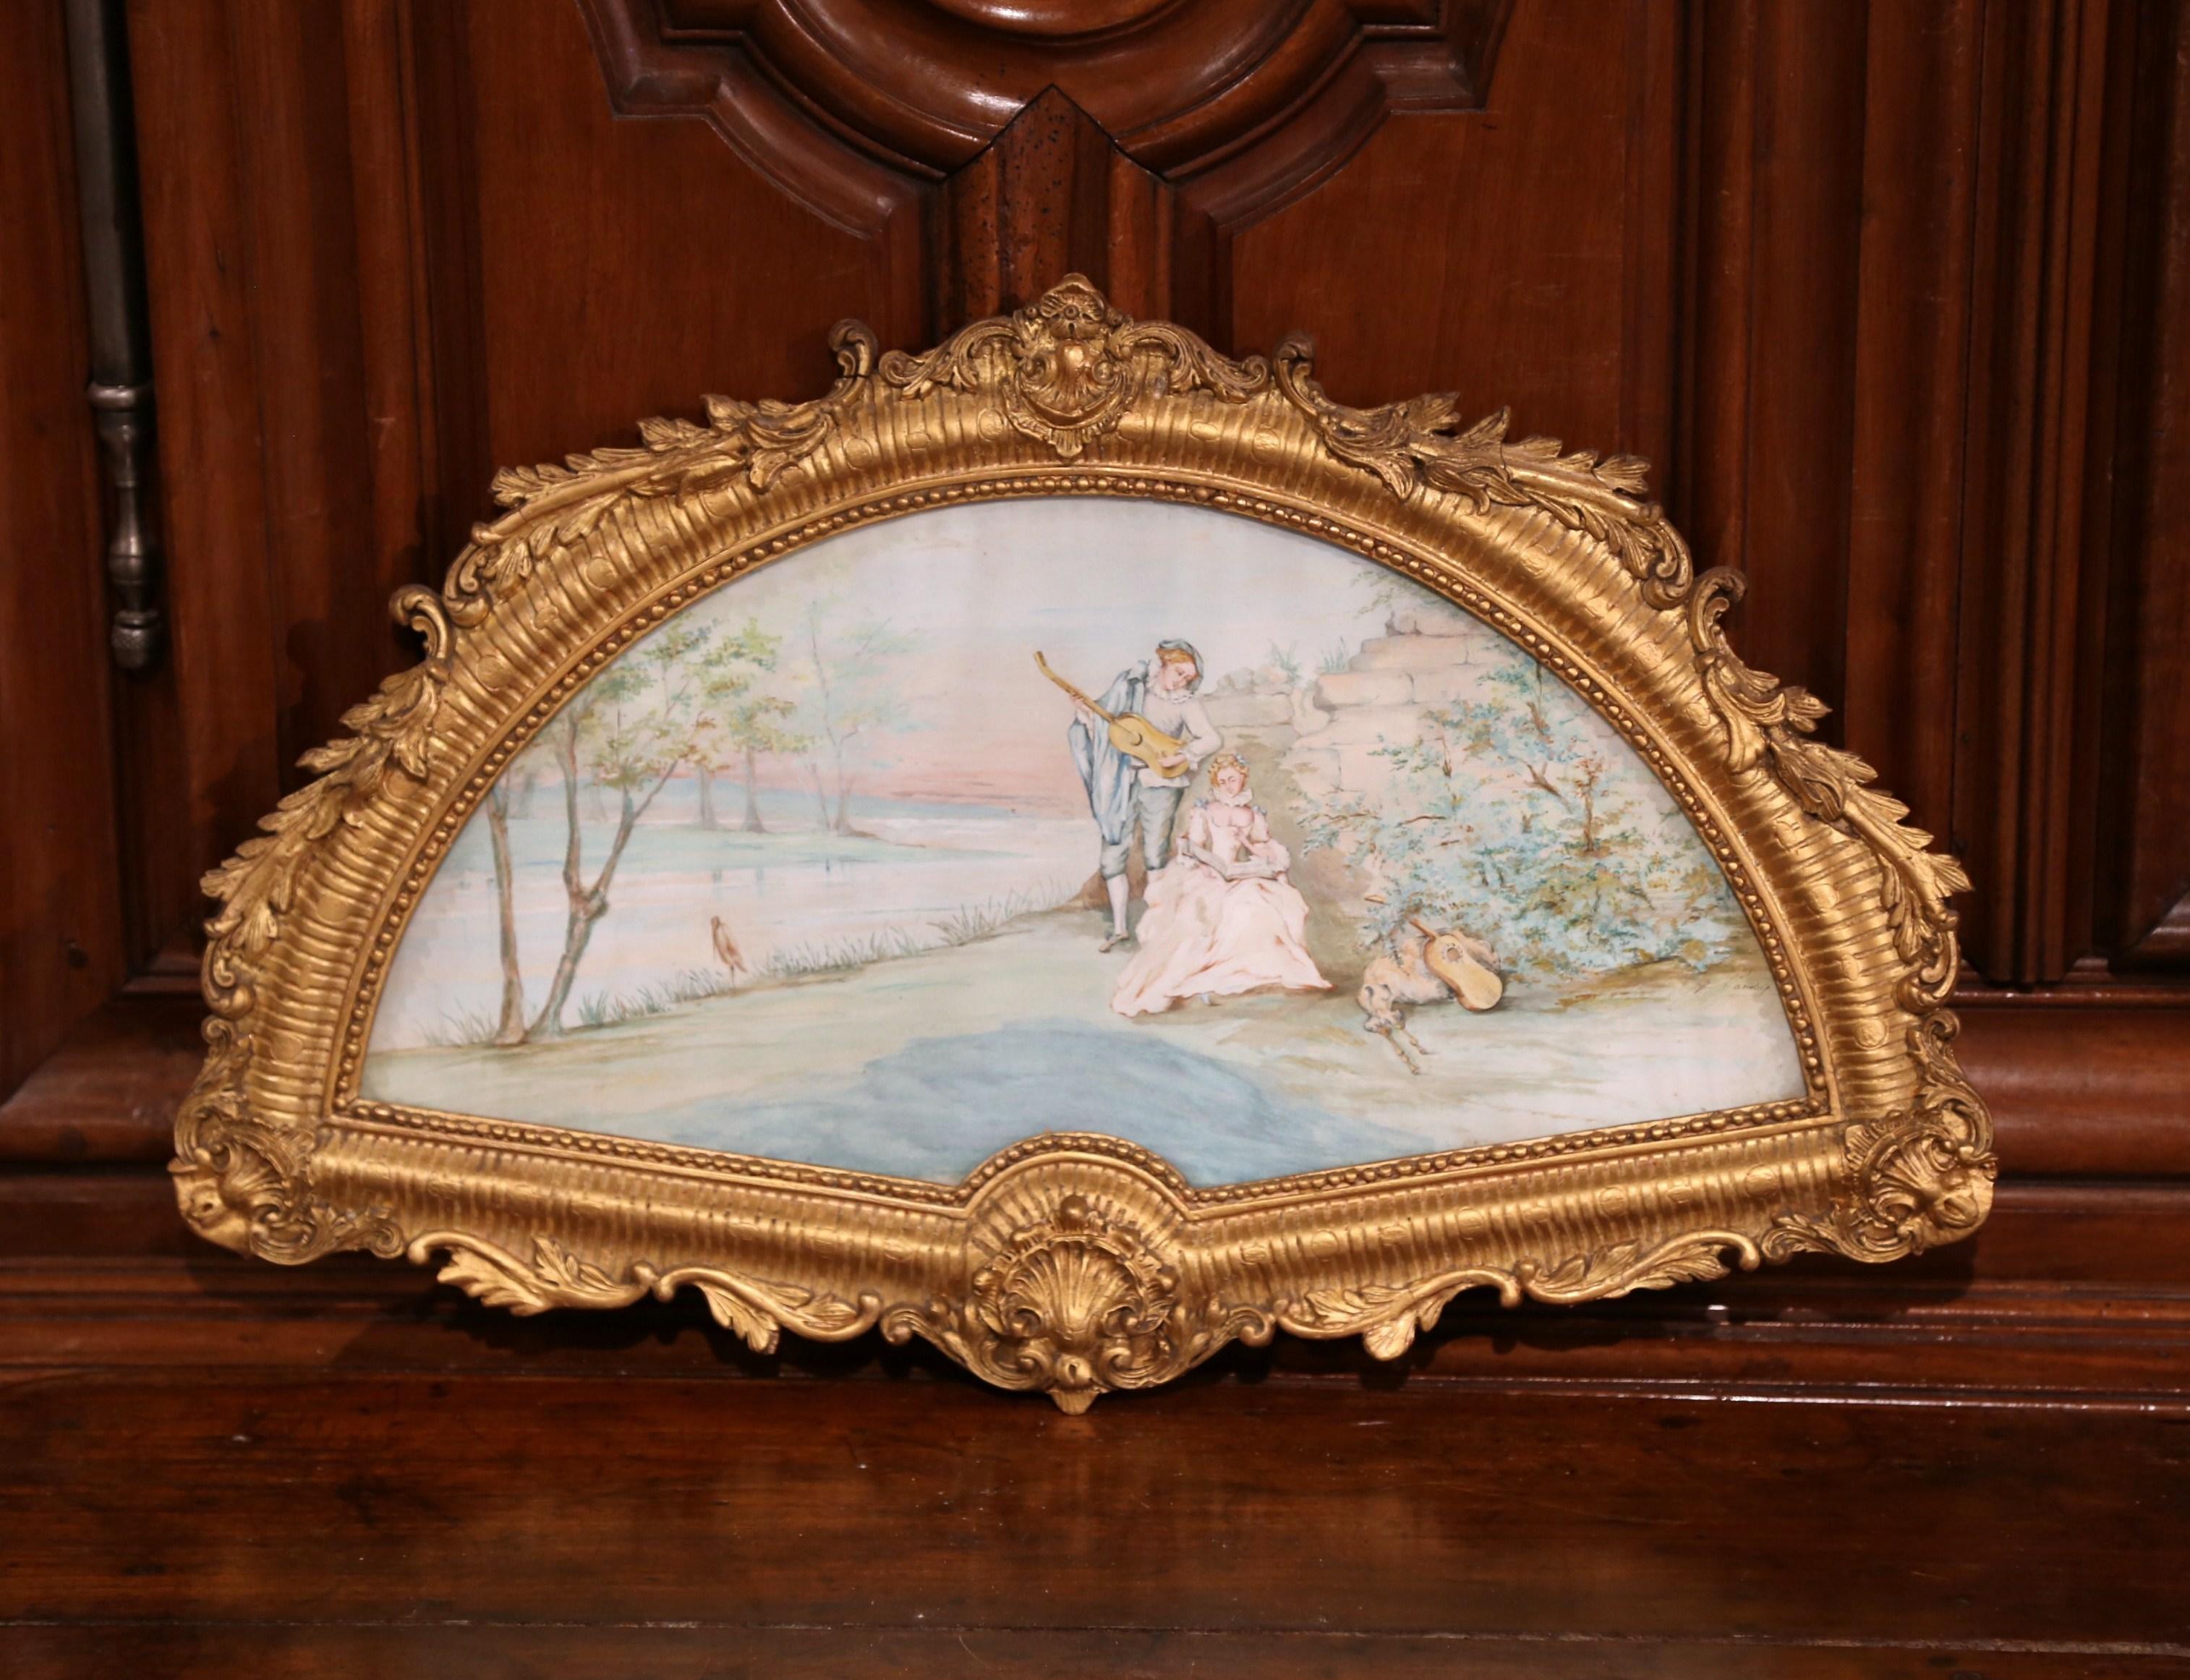 Unknown Figurative Art - 19th Century French Watercolor Courting Scene in Carved Gilt Frame Signed Canoby